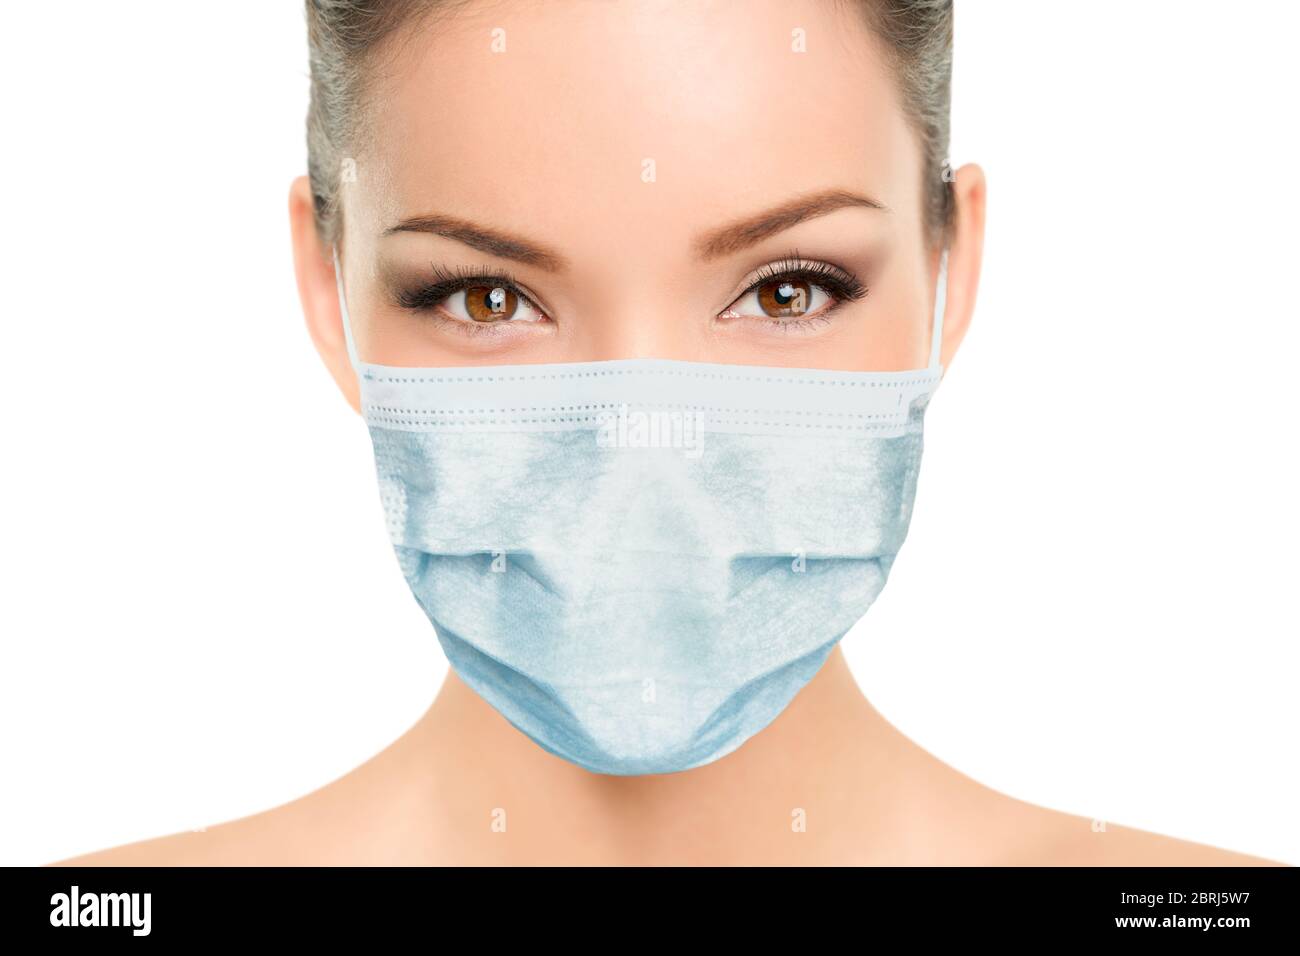 Beautiful Asian woman wearing medical face mask with eyes makeup beauty model portrait isolated on white background for Coronavirus. Stock Photo